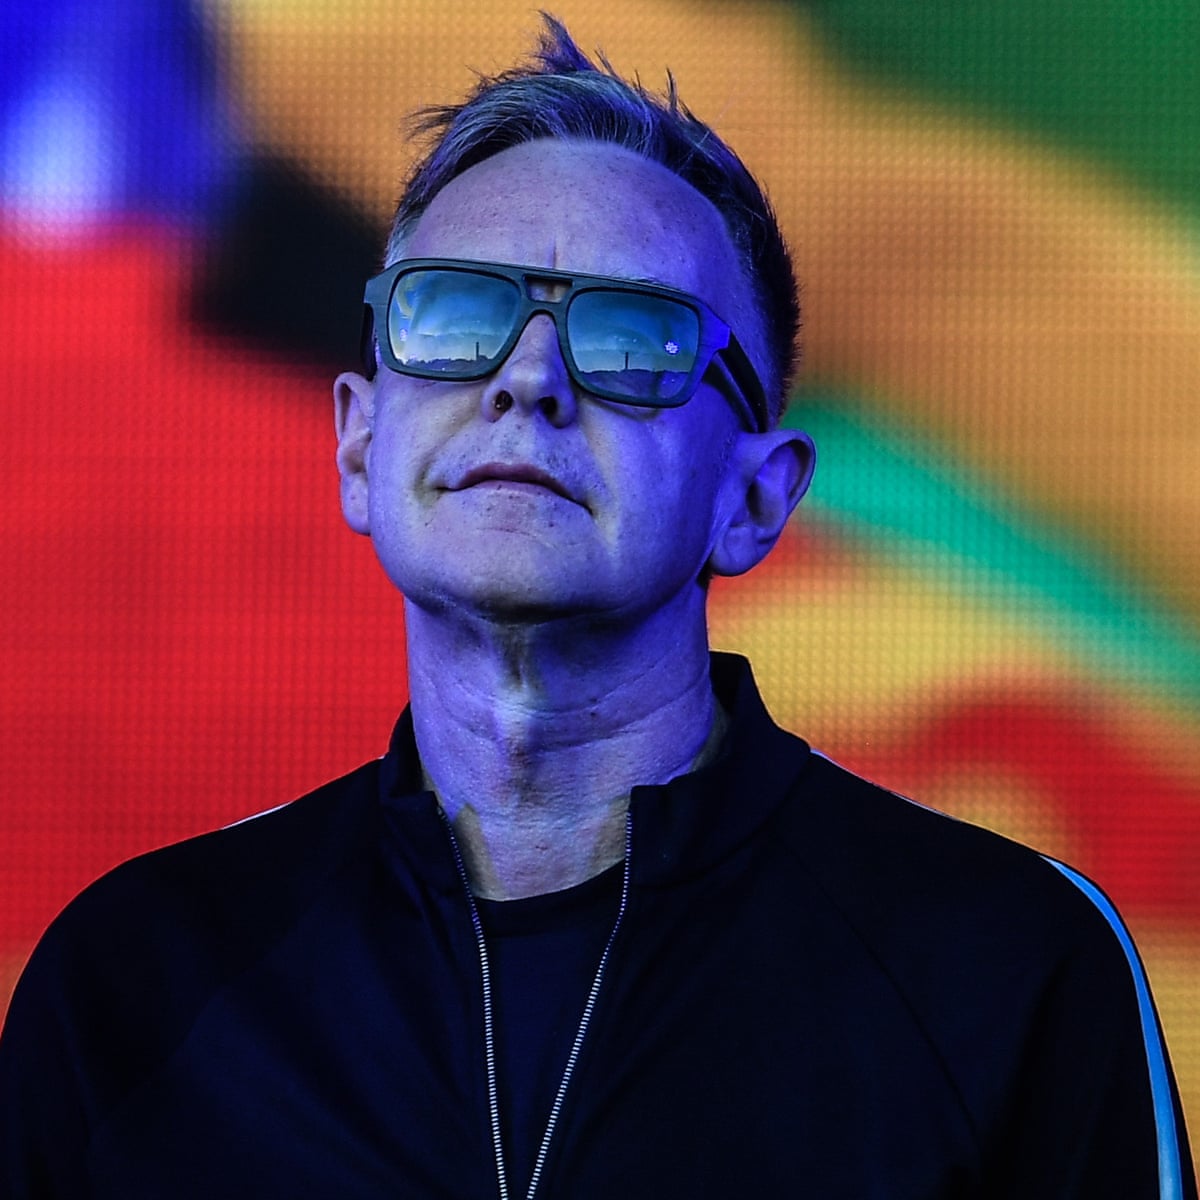 Depeche Mode's Andrew Fletcher dies aged 60 | Music | The Guardian